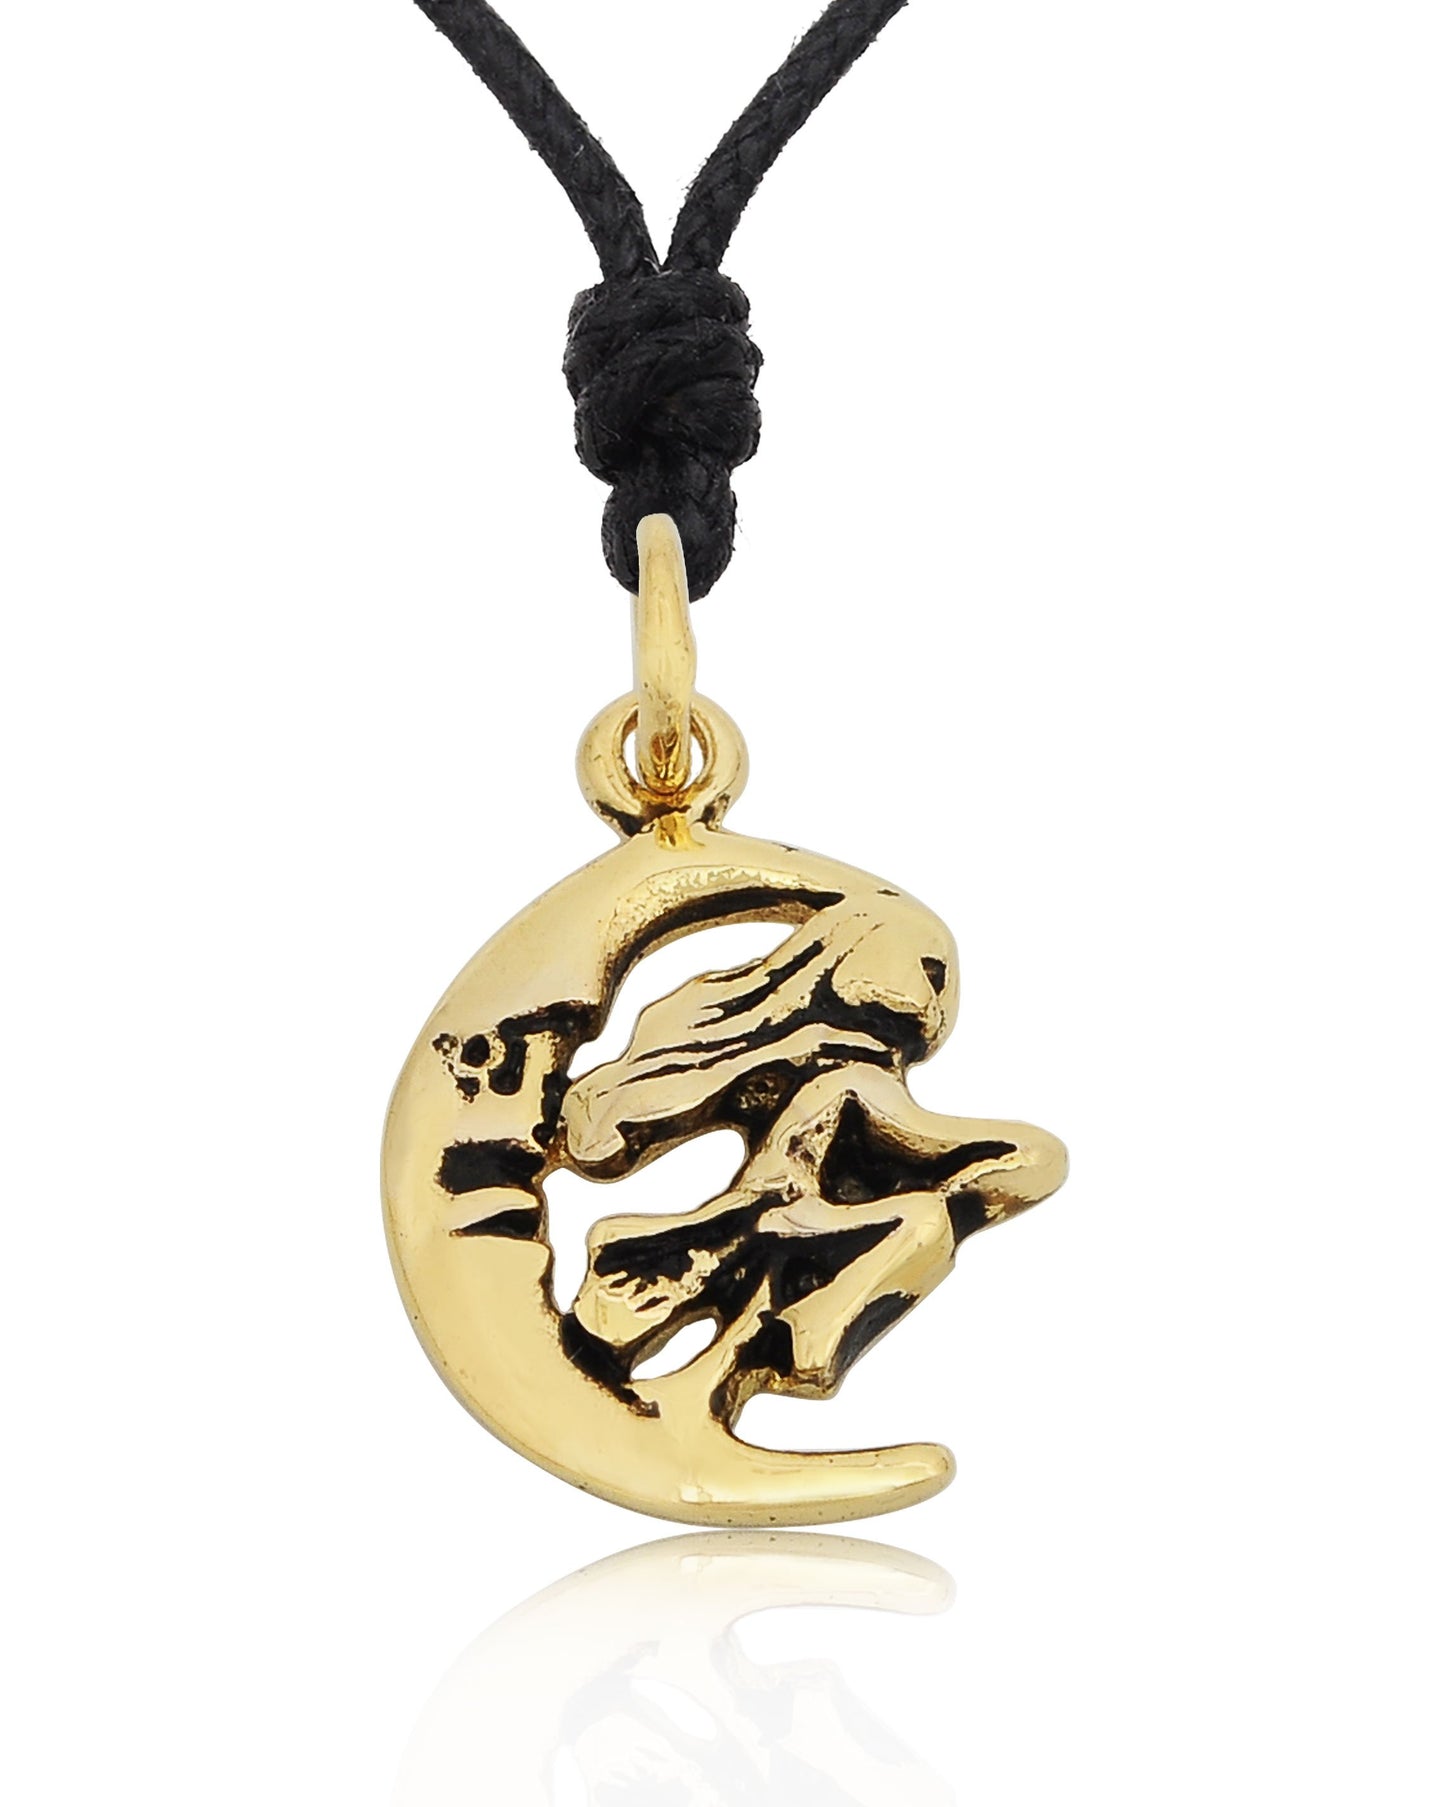 Witch Moon Handmade Gold Brass Silver Pewter Charm Necklace Pendant Jewelry